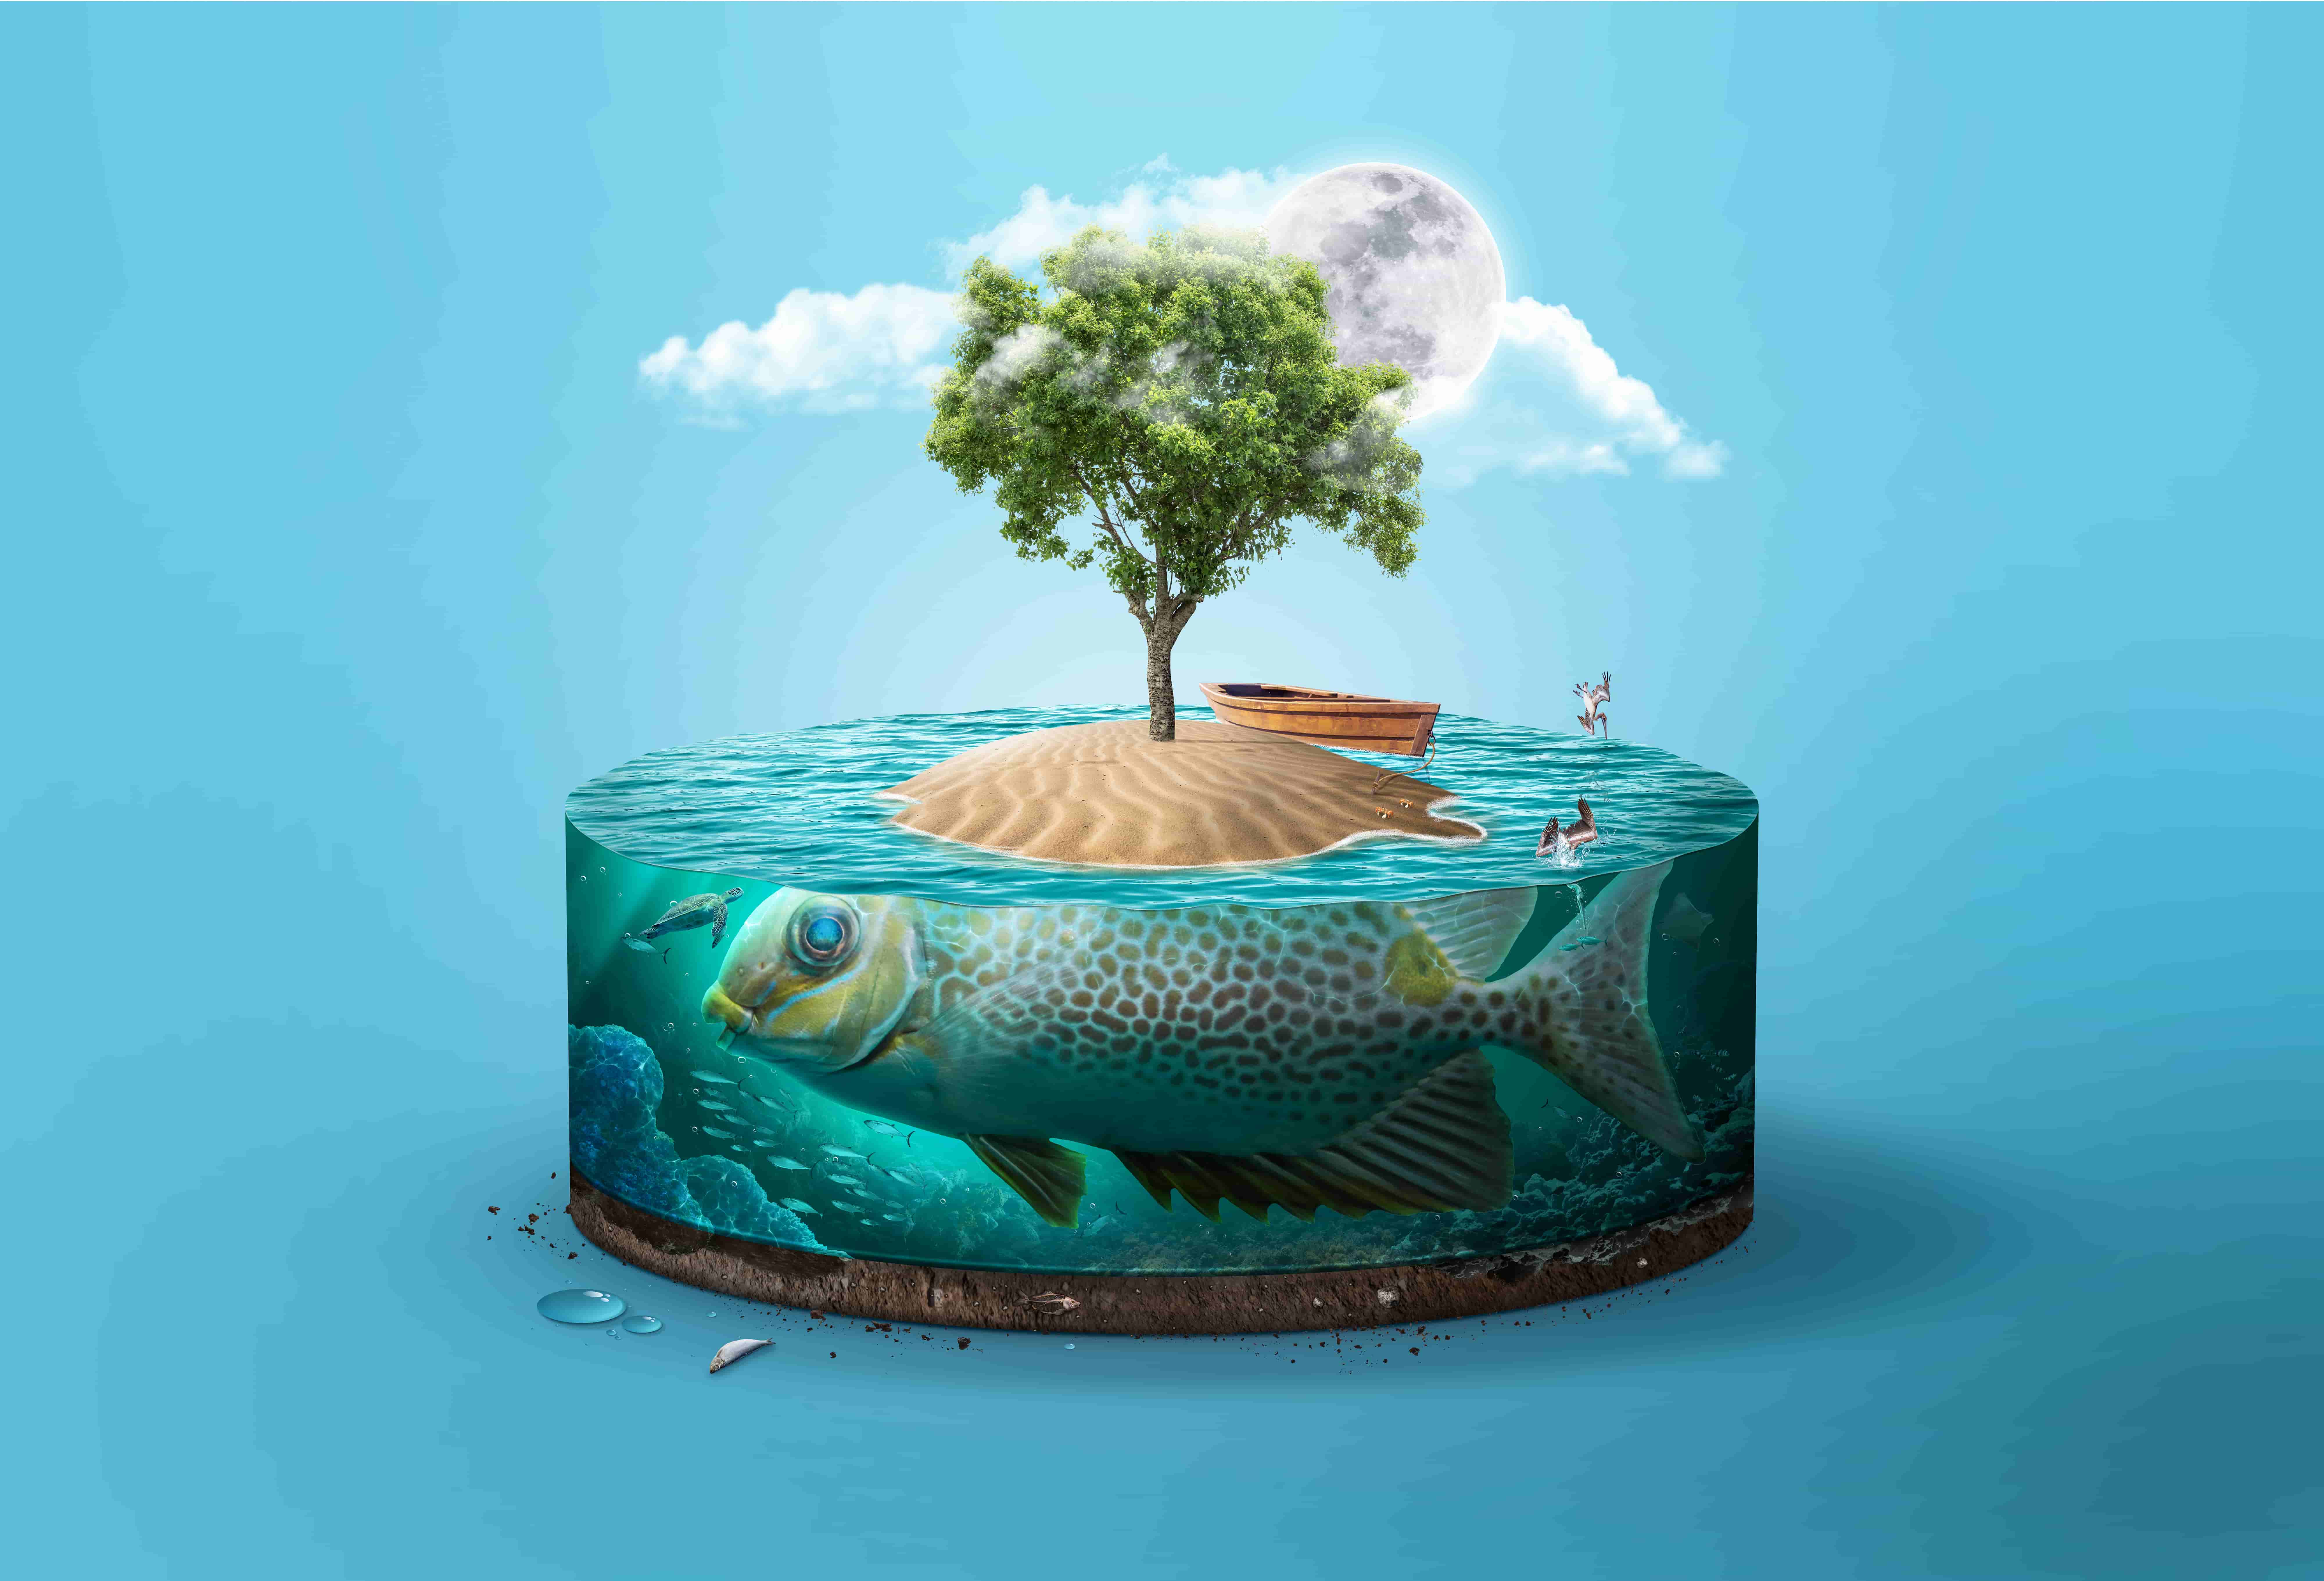 cut-aquarium-ocean-with-fish-inside-fish-island-isolated-with-tree (1)-min